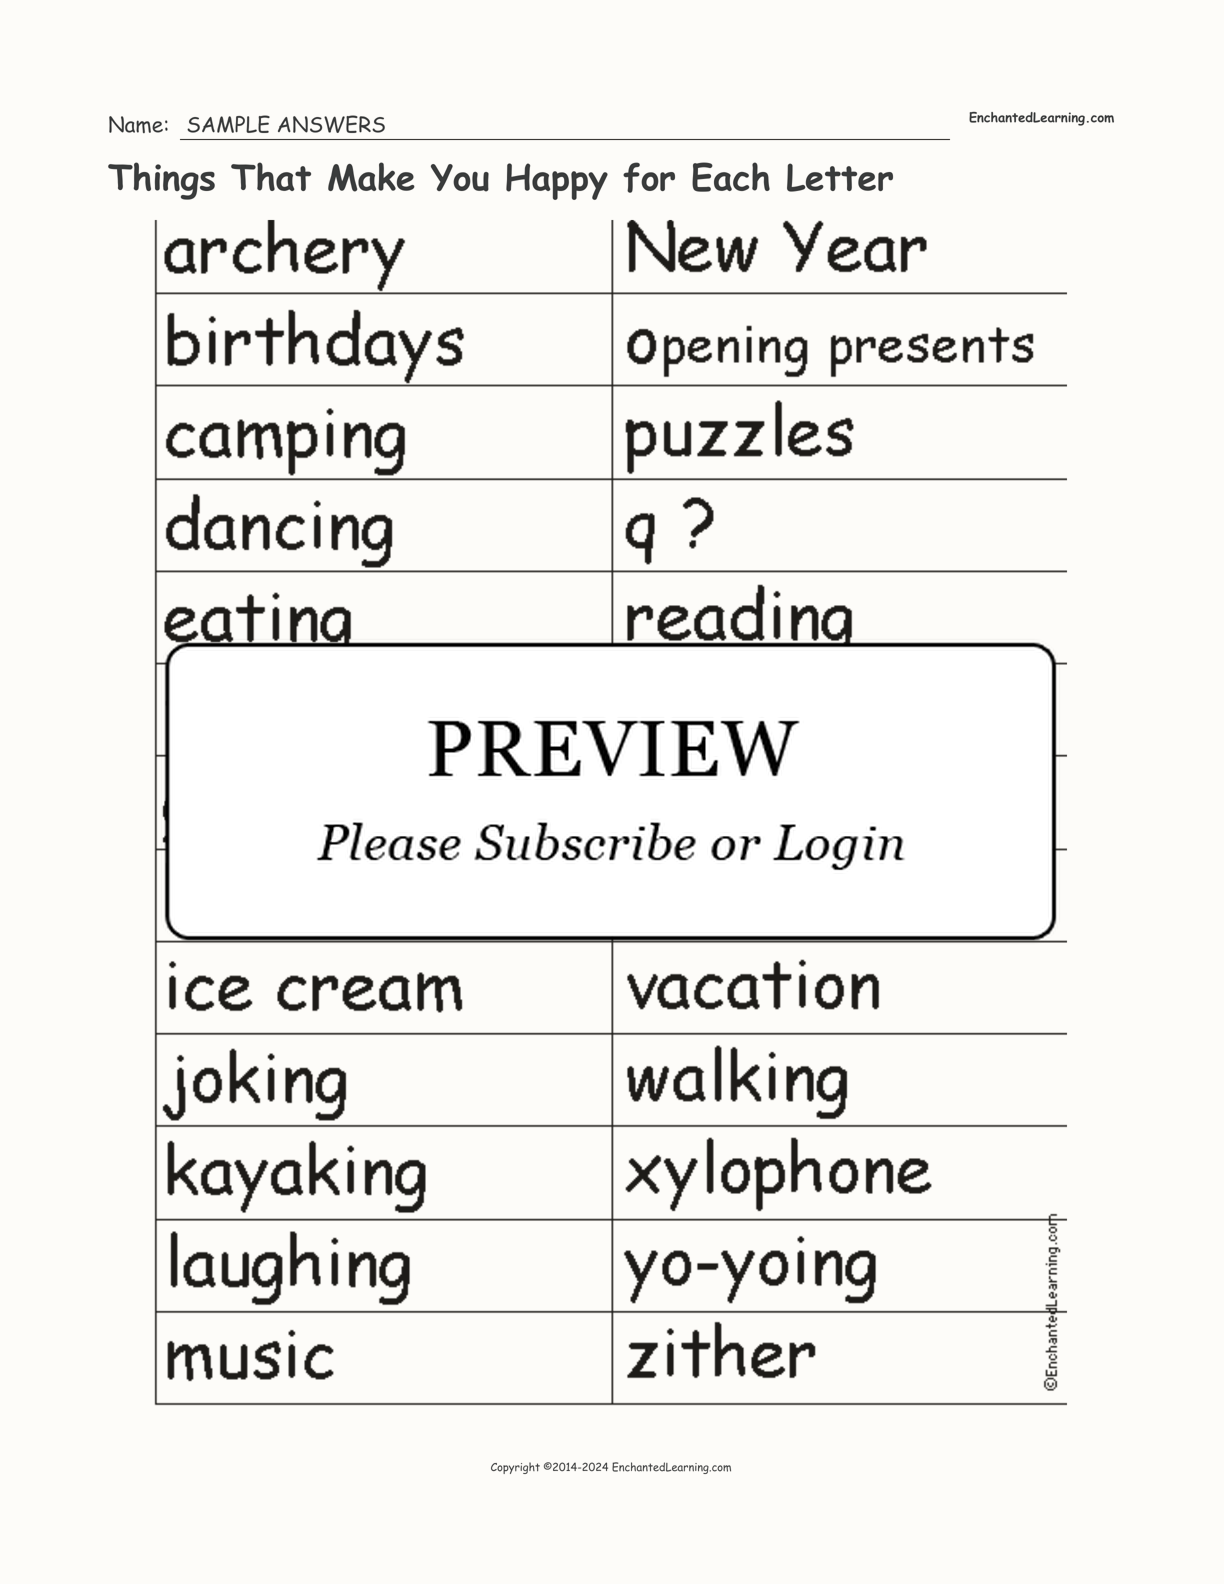 Things That Make You Happy for Each Letter interactive worksheet page 2